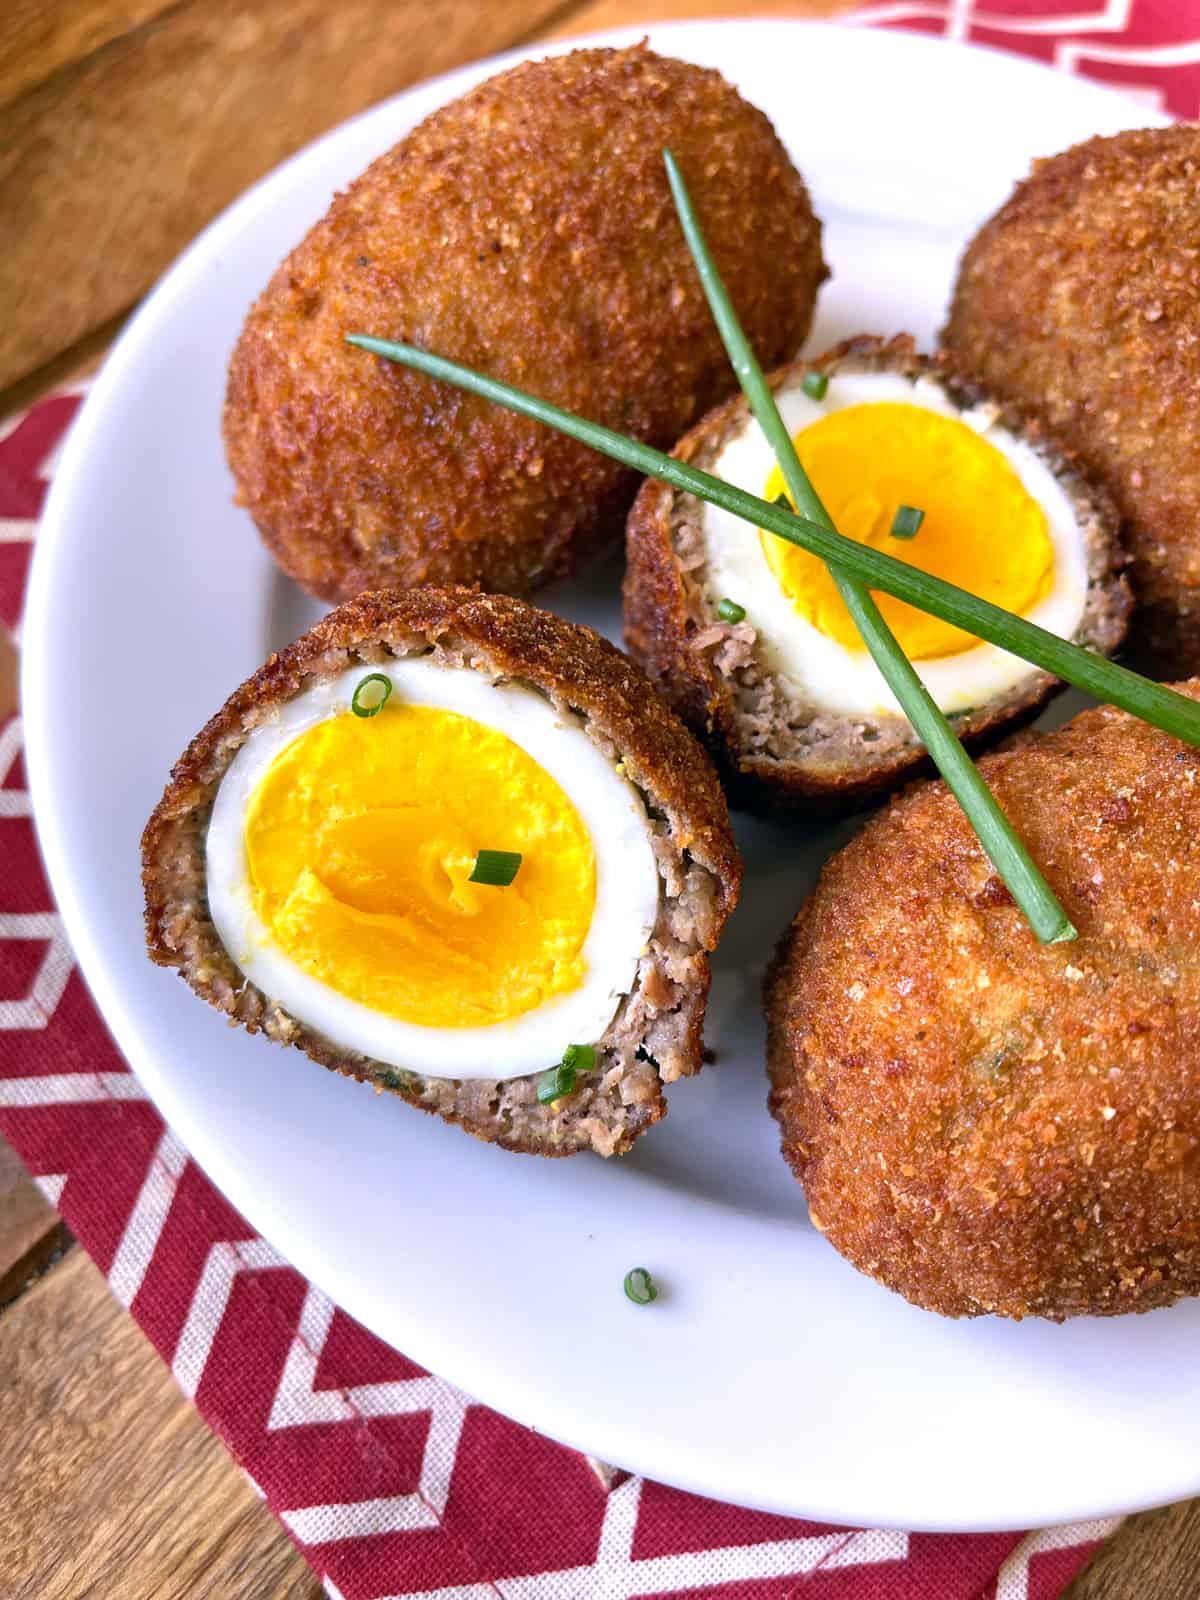 scotch eggs recipe traditional authentic british english sausage breadcrumbs breading fried mustard sauce